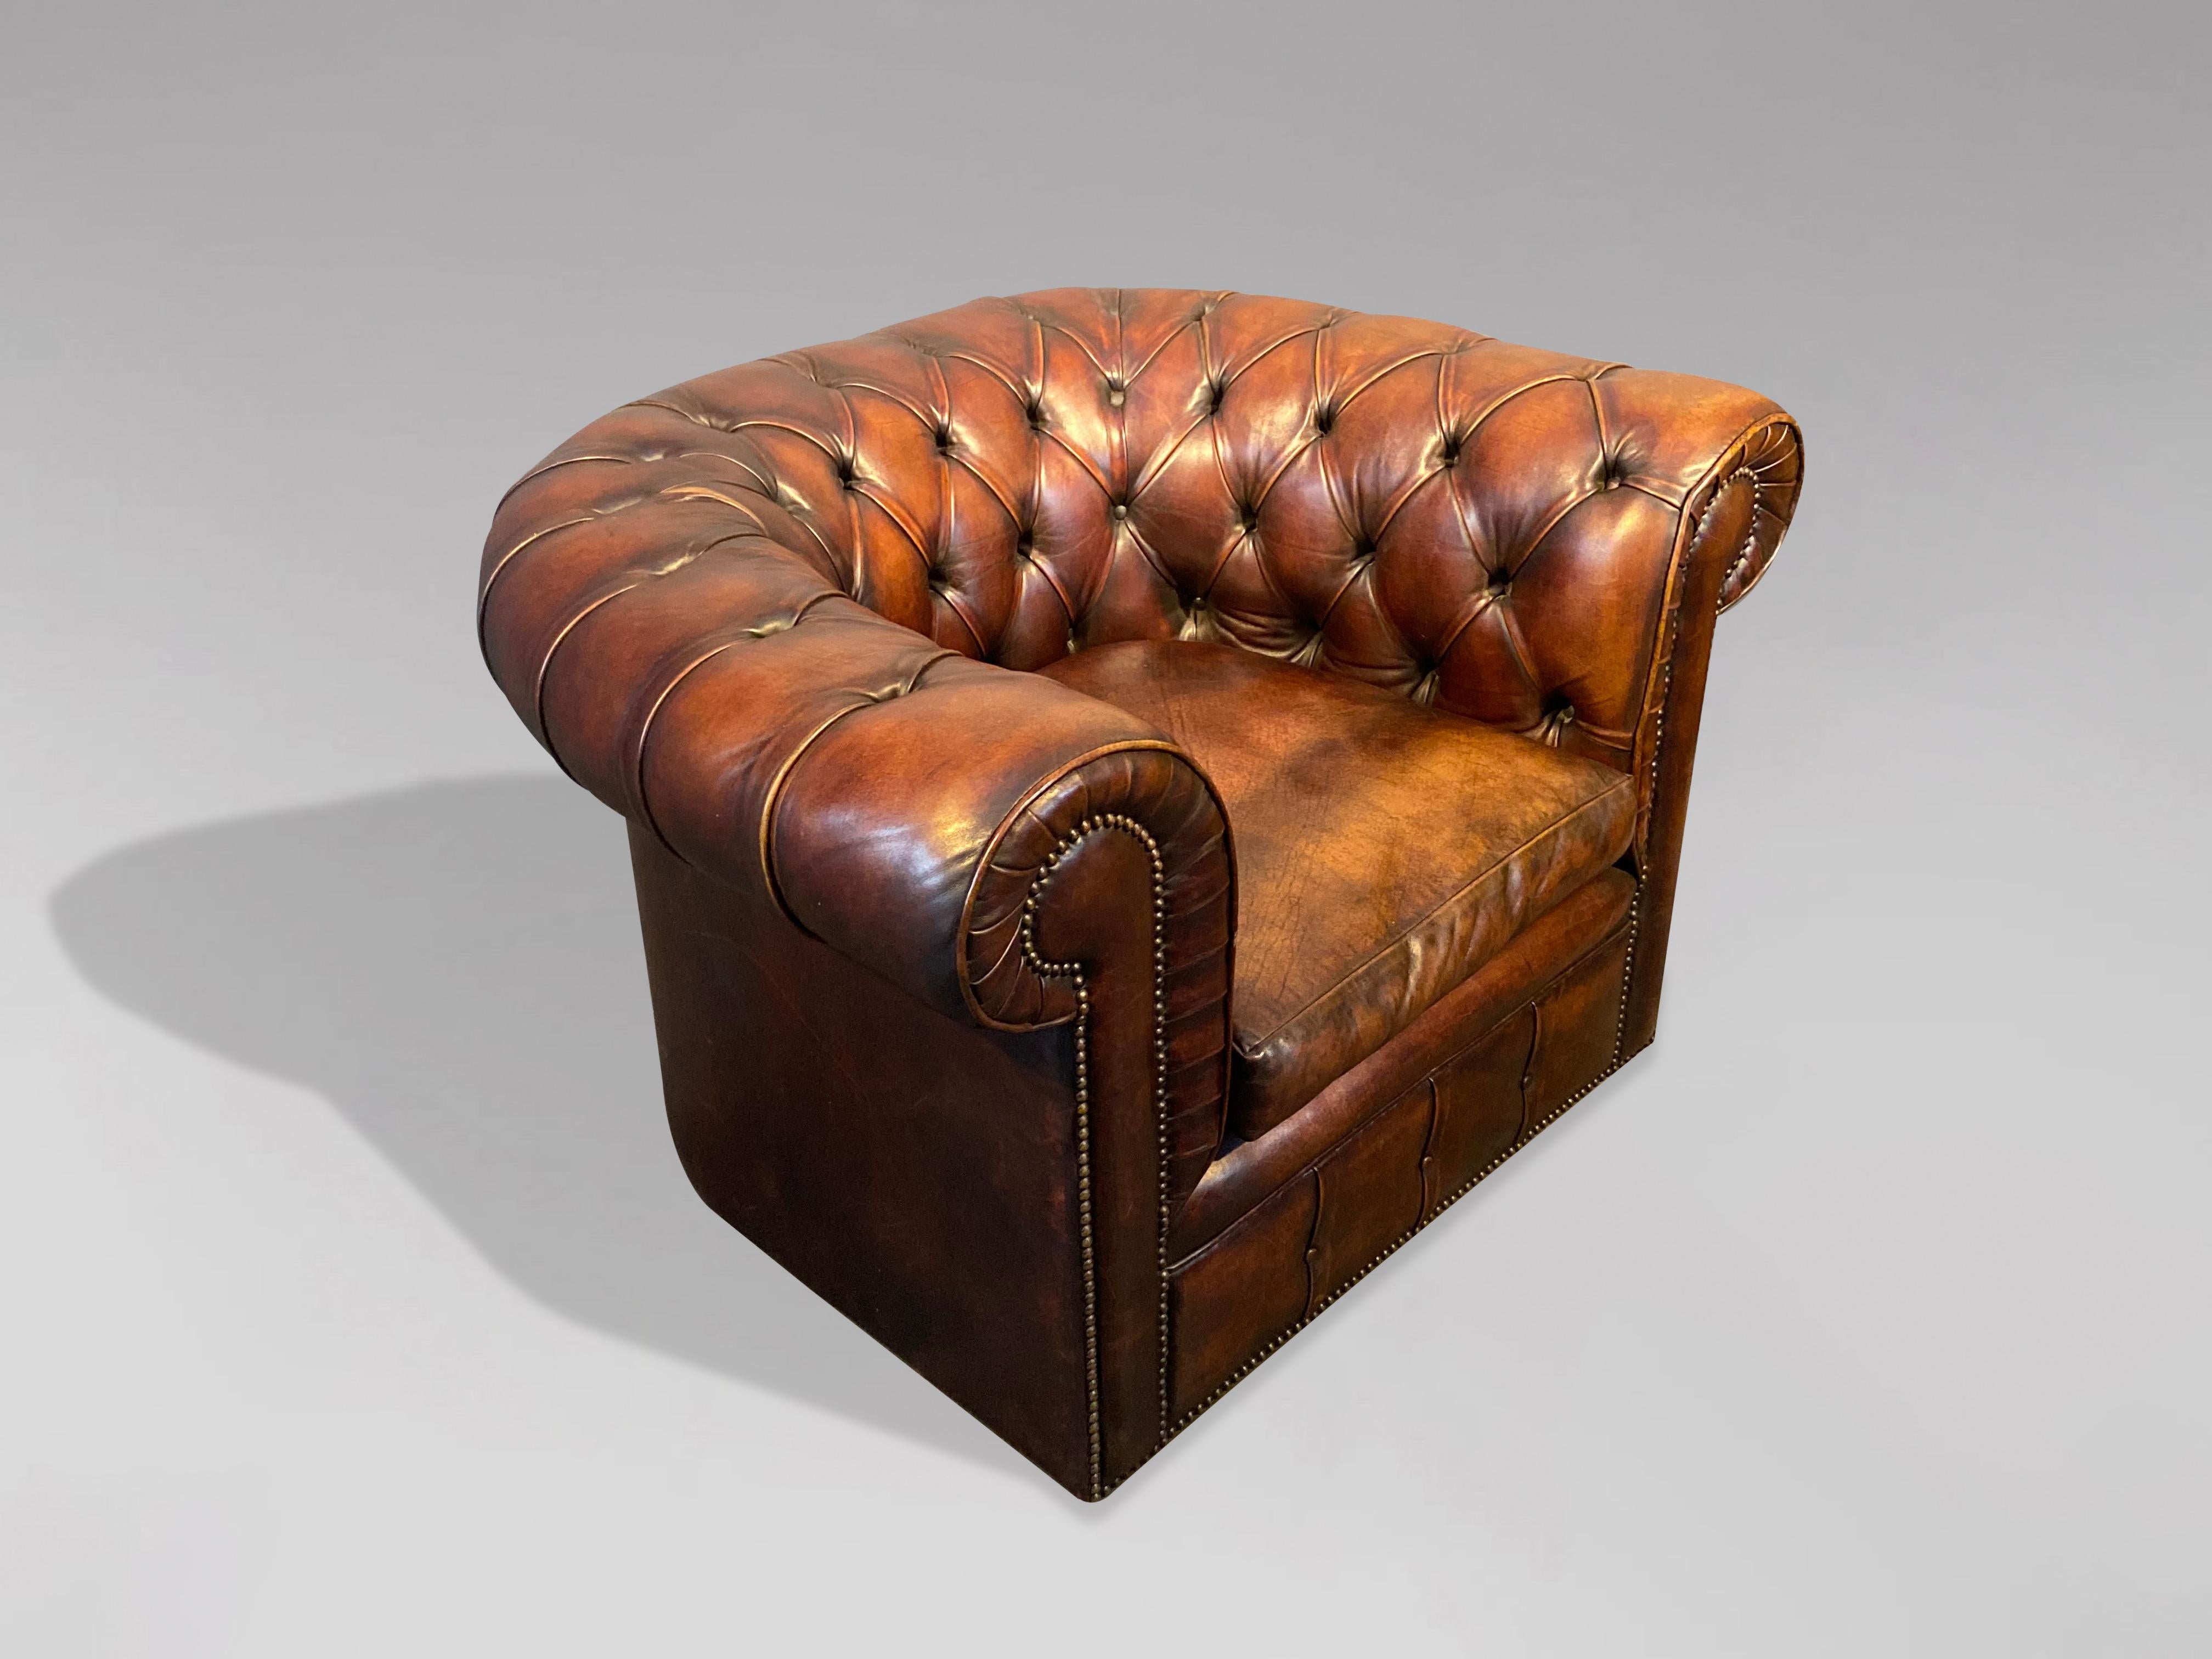 A good quality early 20th century, brown leather club armchair chesterfield. Original hand dyed golden brown leather hide that has been cleaned and polished giving a lovely soft and sumptuous feel to the quality leather. This chesterfield is horse